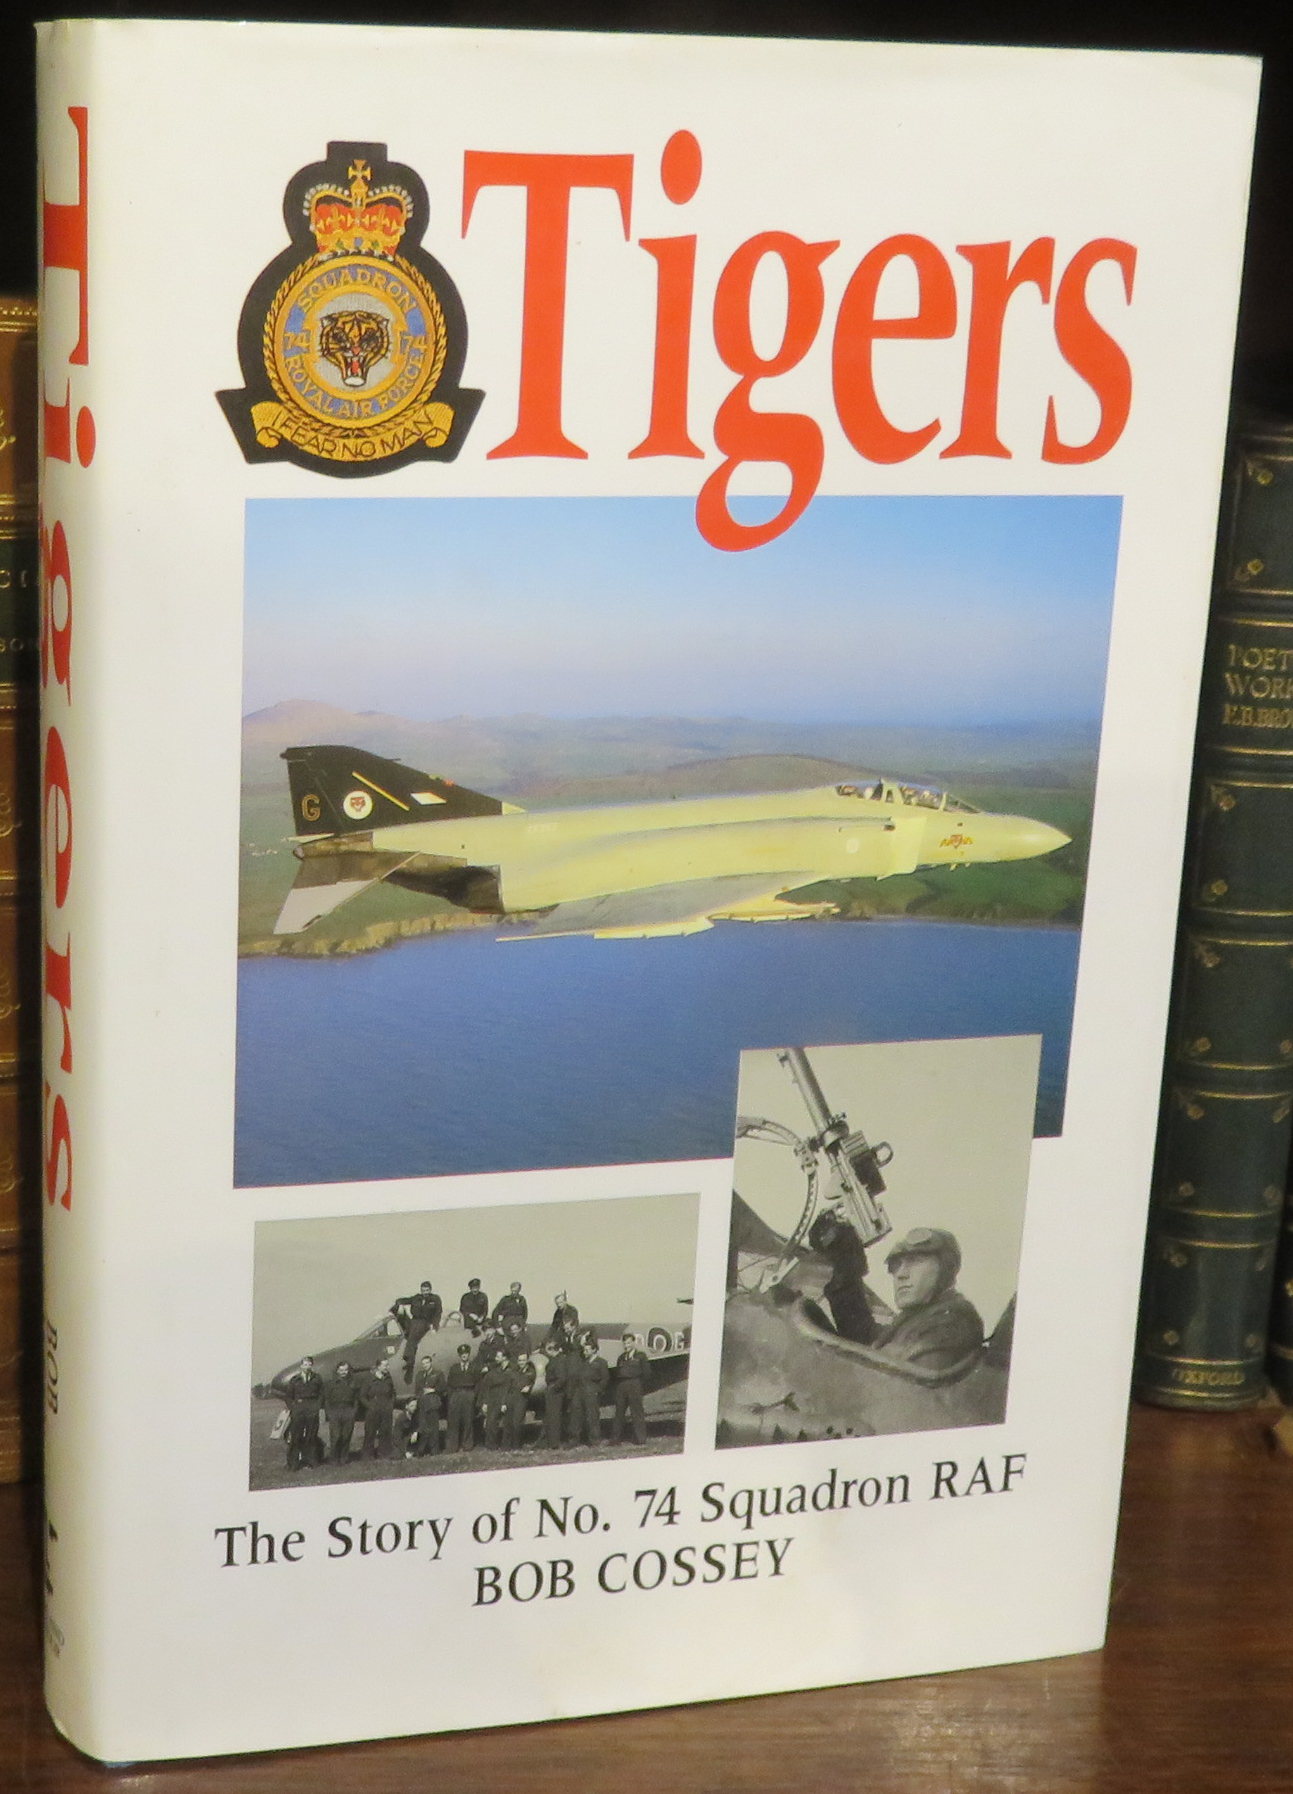 Tigers The Story of No. 74 Squadron RAF